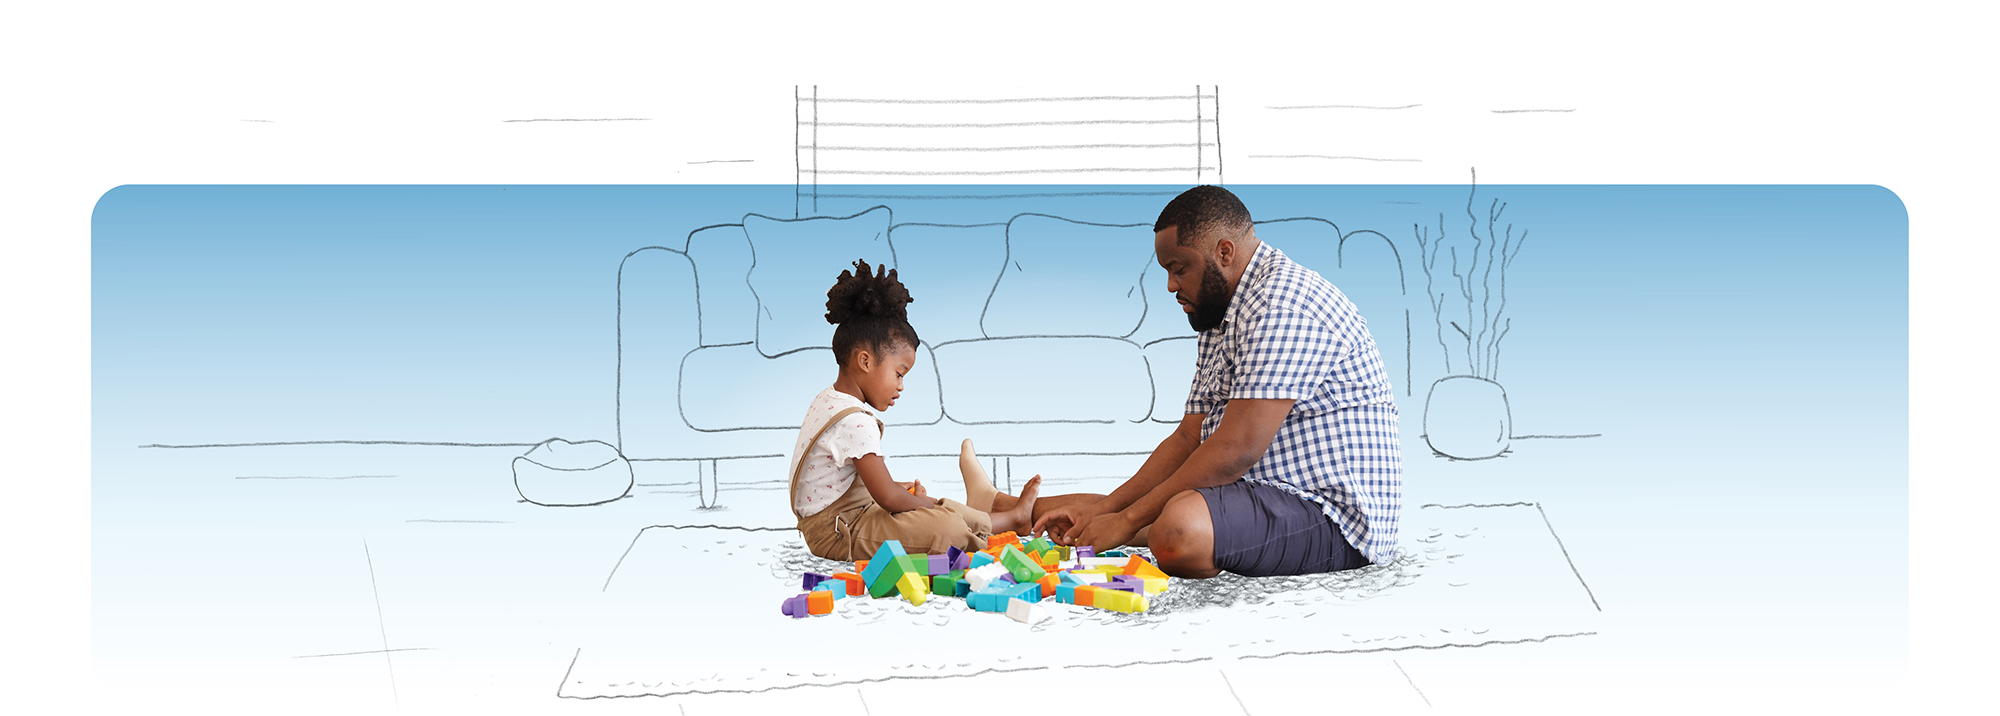 Checking hero. Image of little girl and father playing blocks